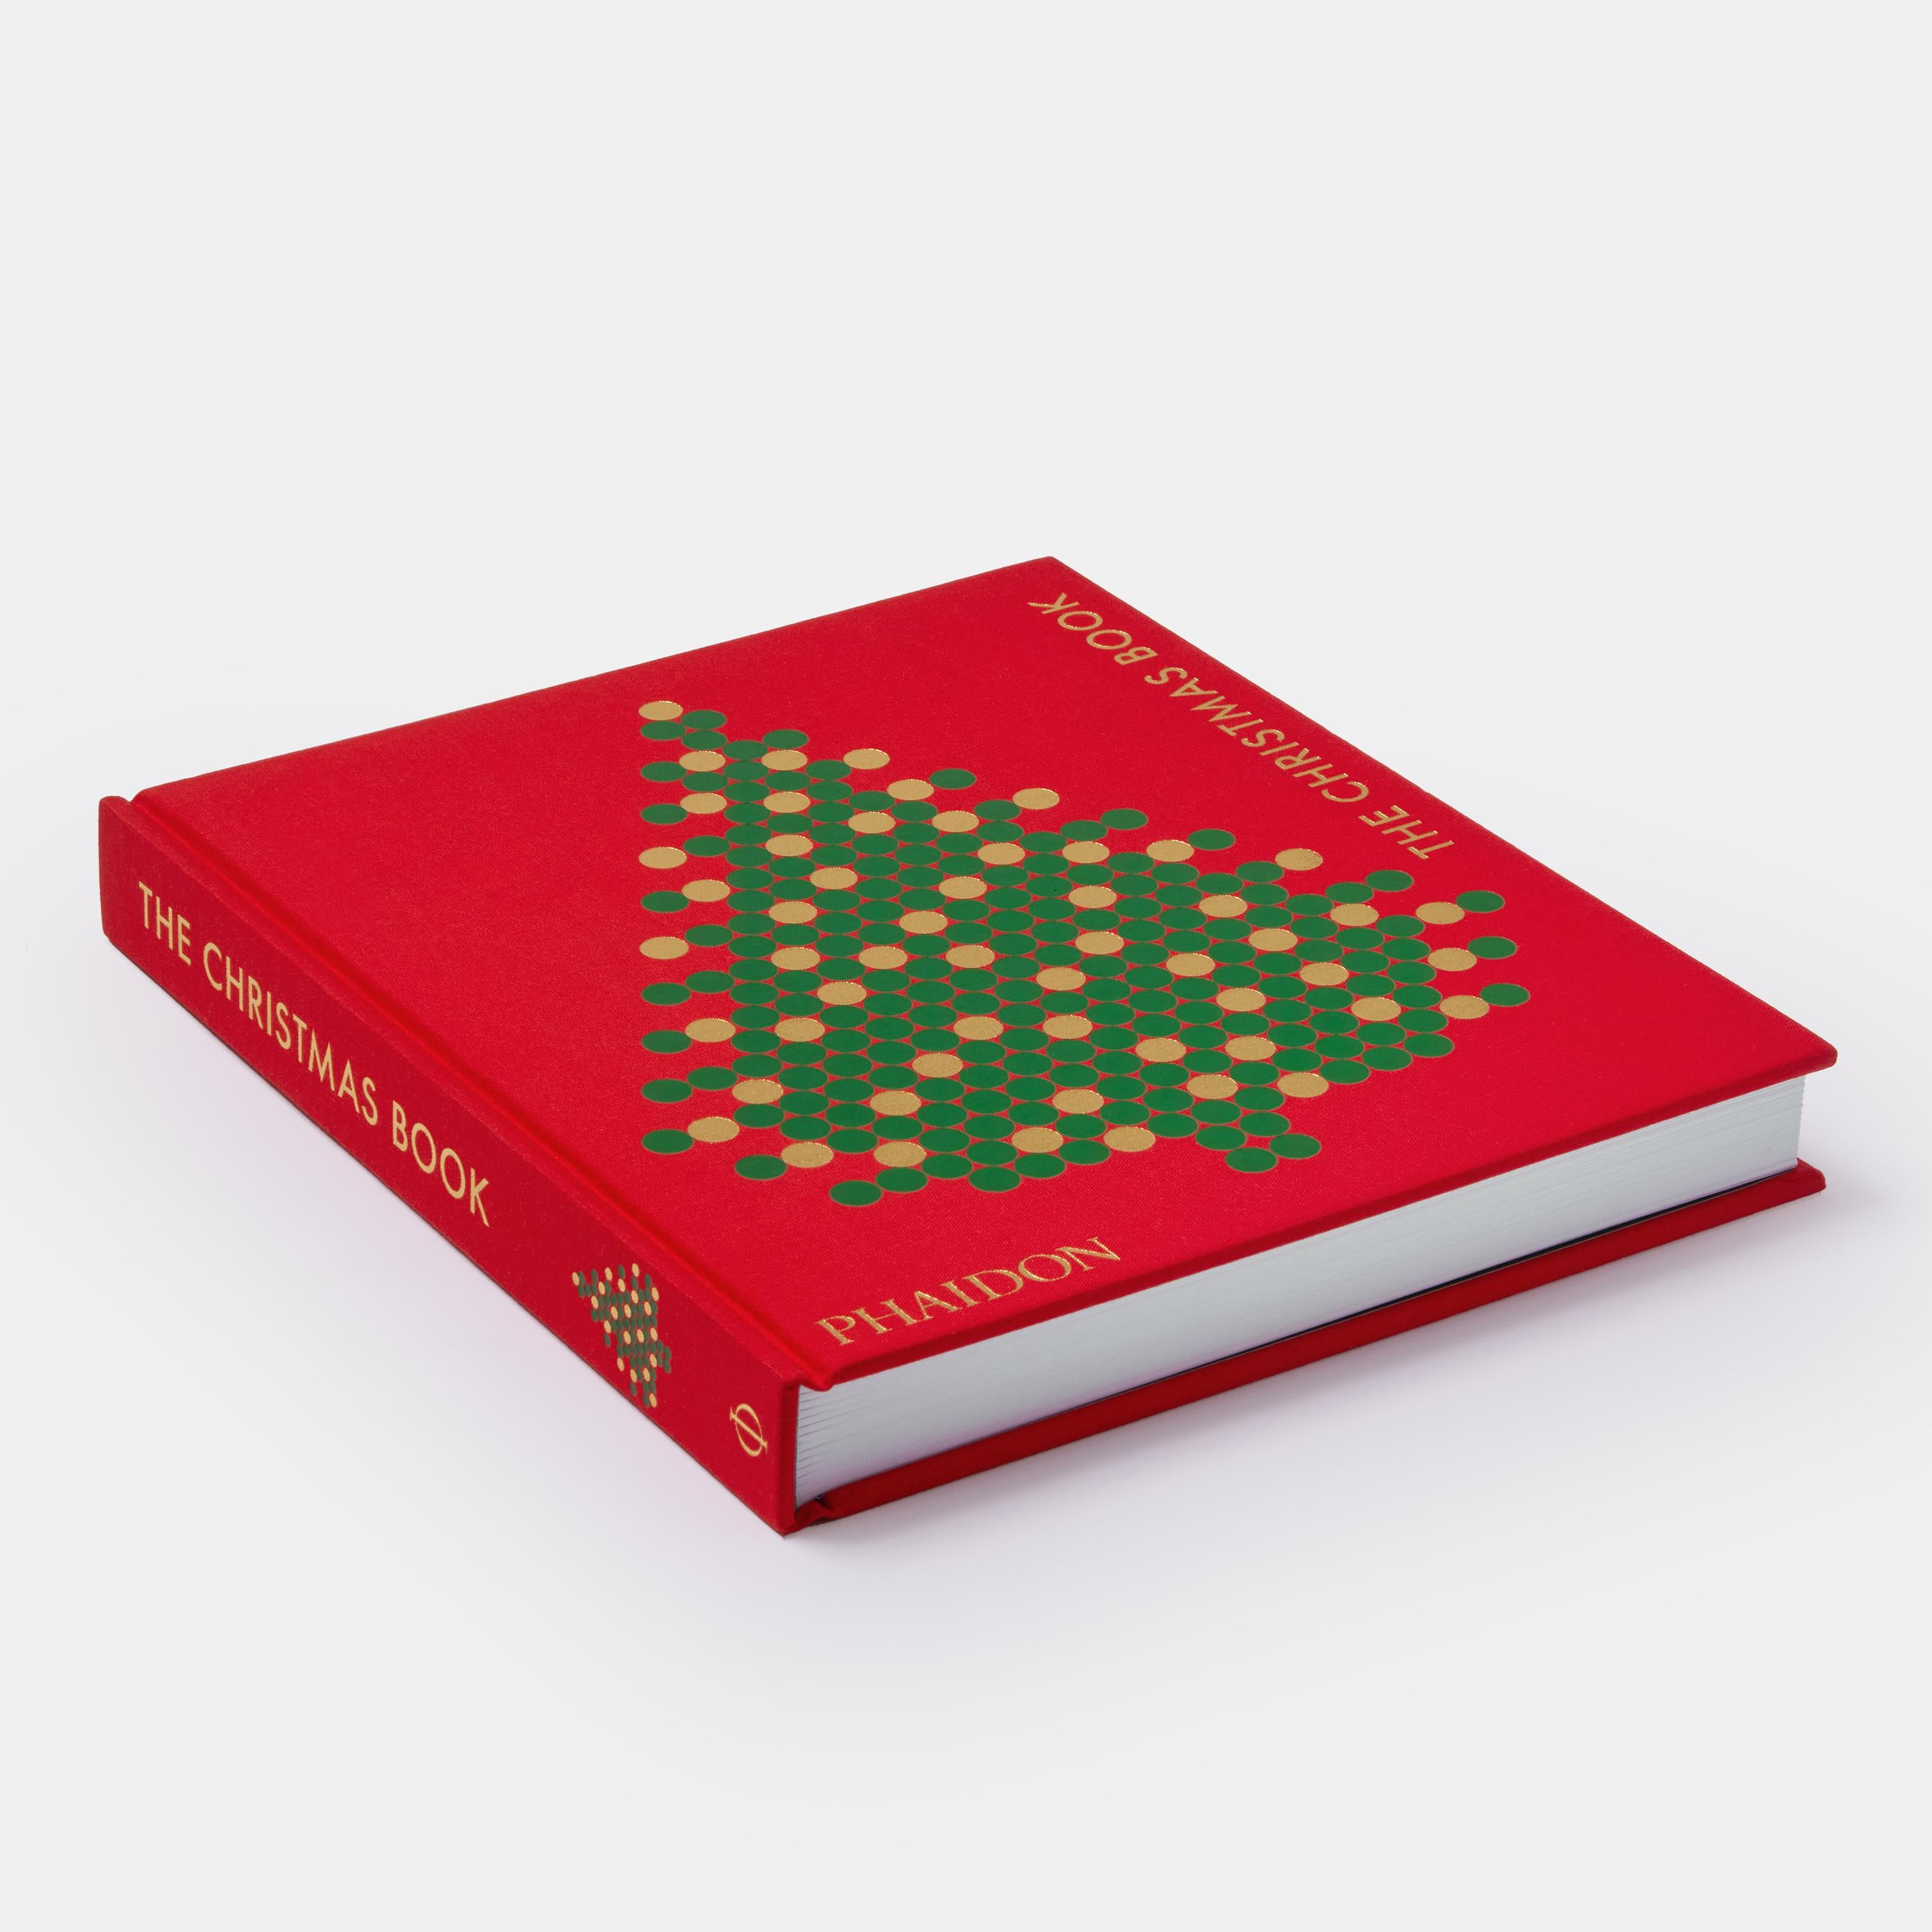 A visual celebration of Christmas, from religious beginnings to festive cultural touchstones – a book to treasure

This book is a unique and groundbreaking visual celebration of Christmas, a joyous religious and cultural occasion observed by